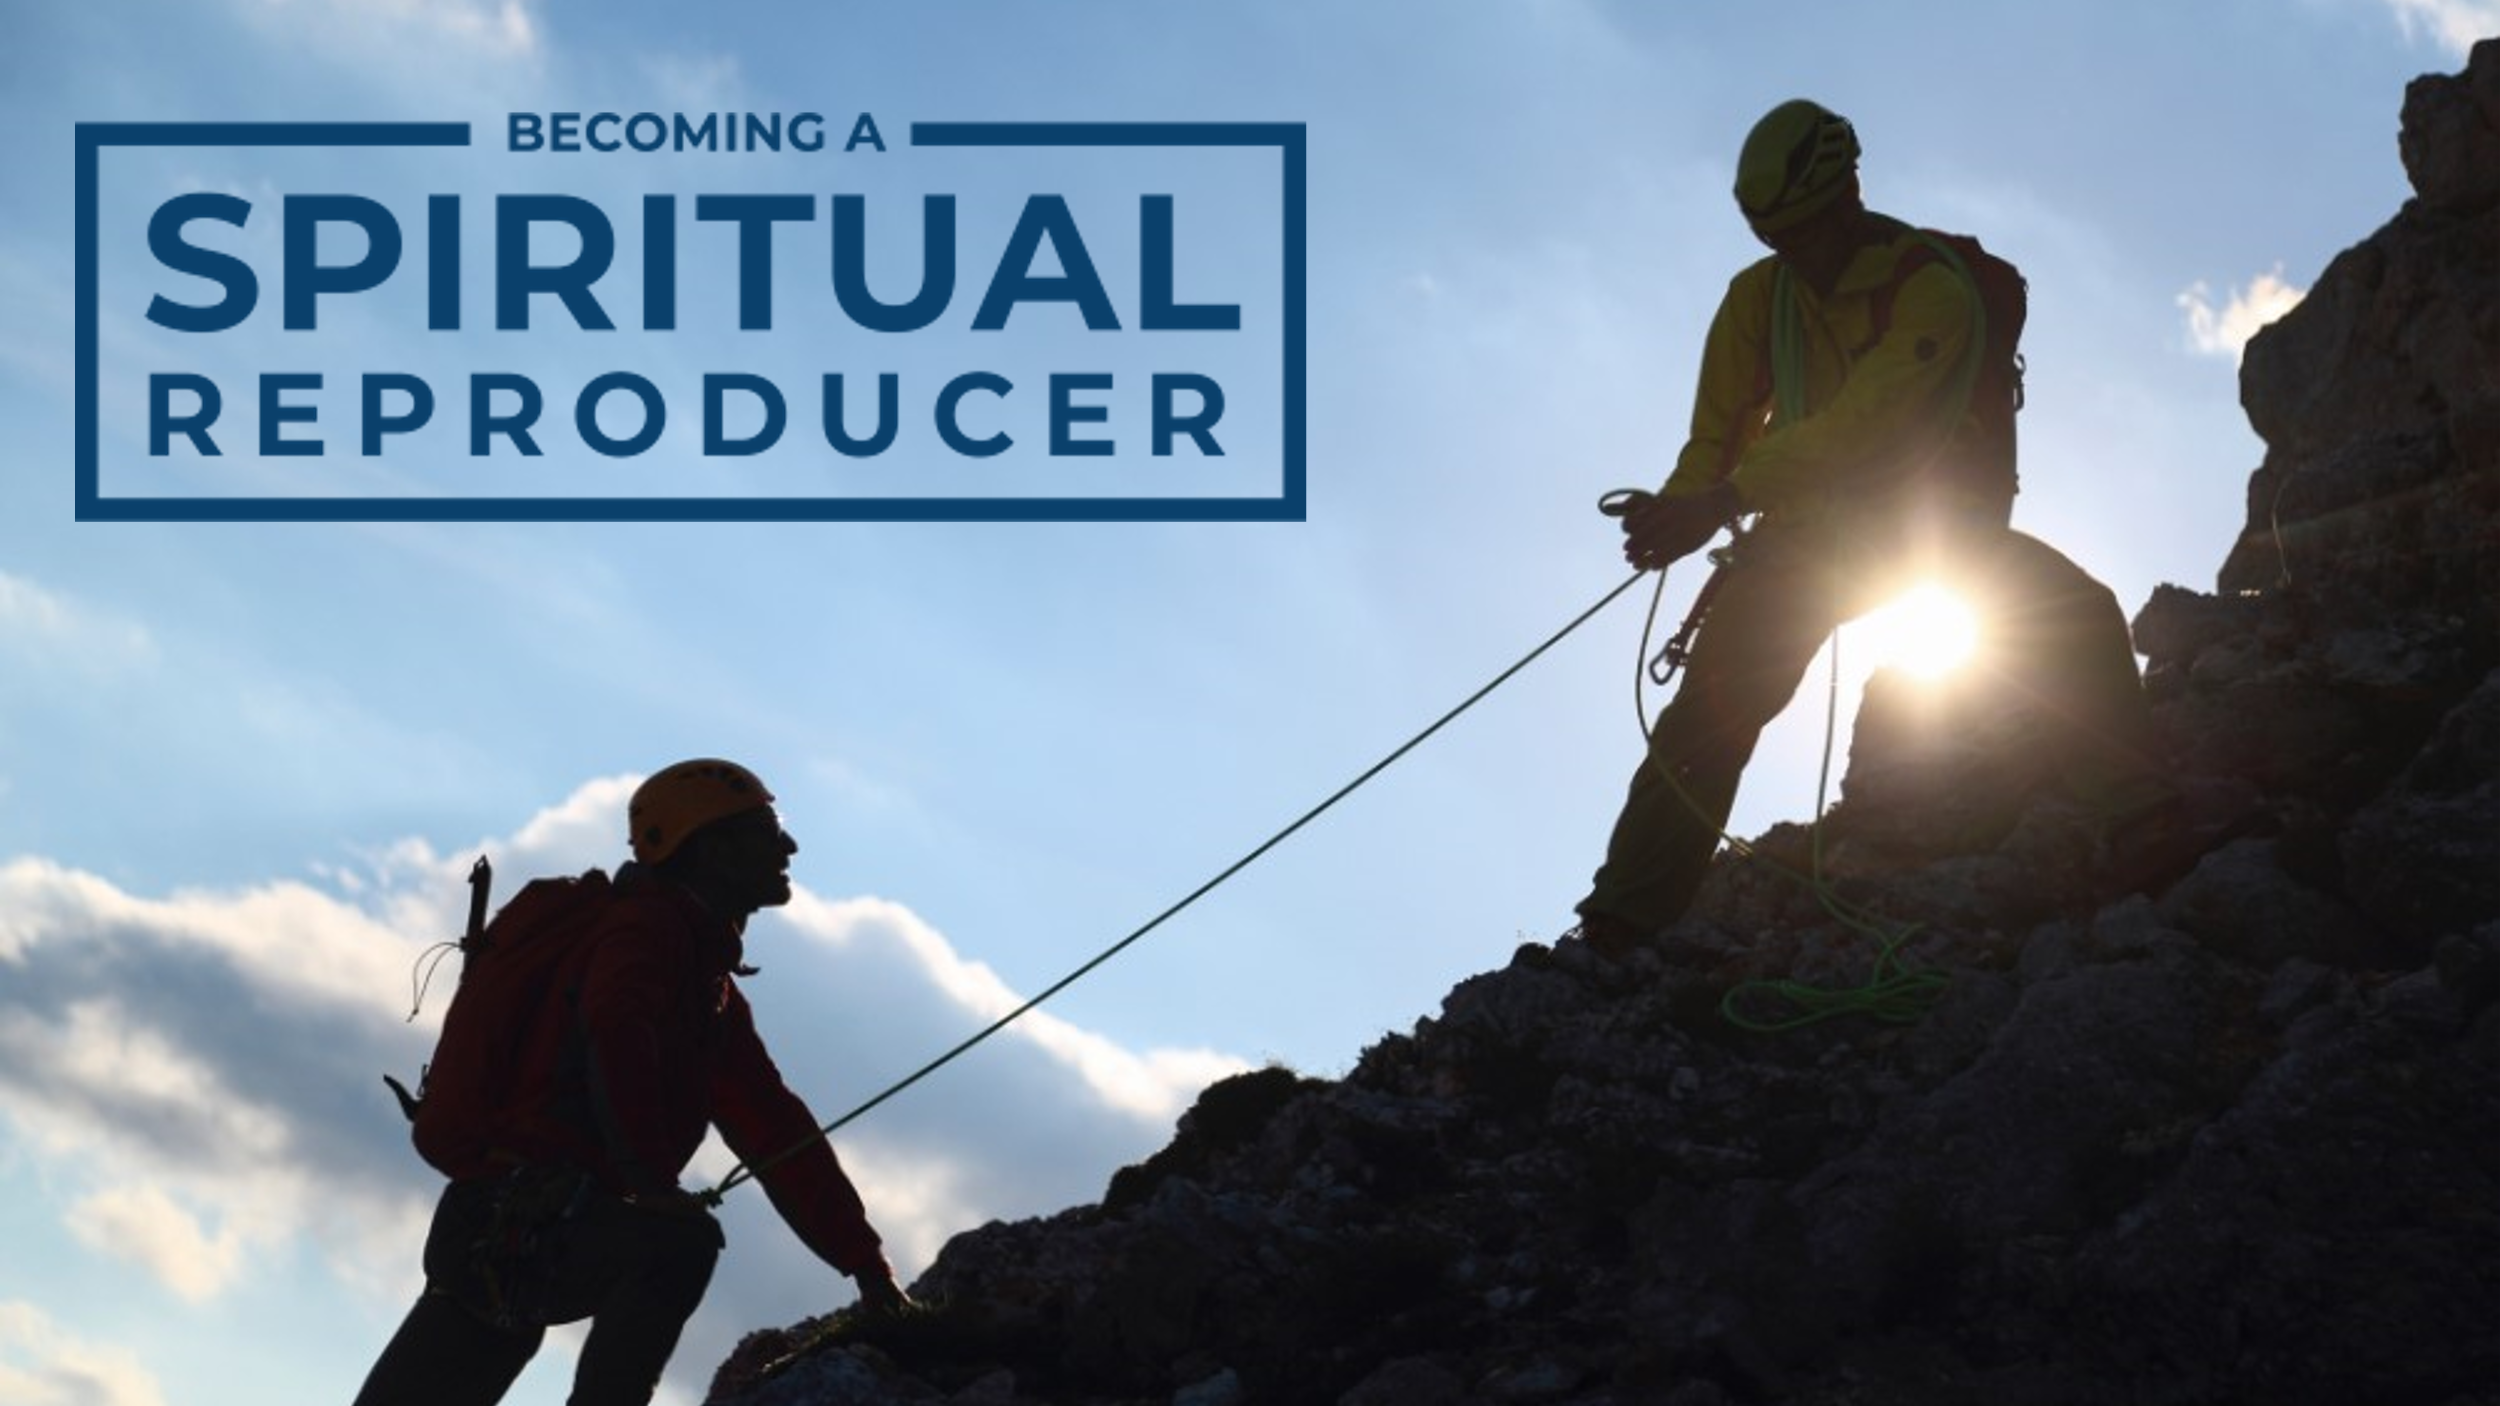 Becoming a Spiritual Reproducer banner with two men climbing